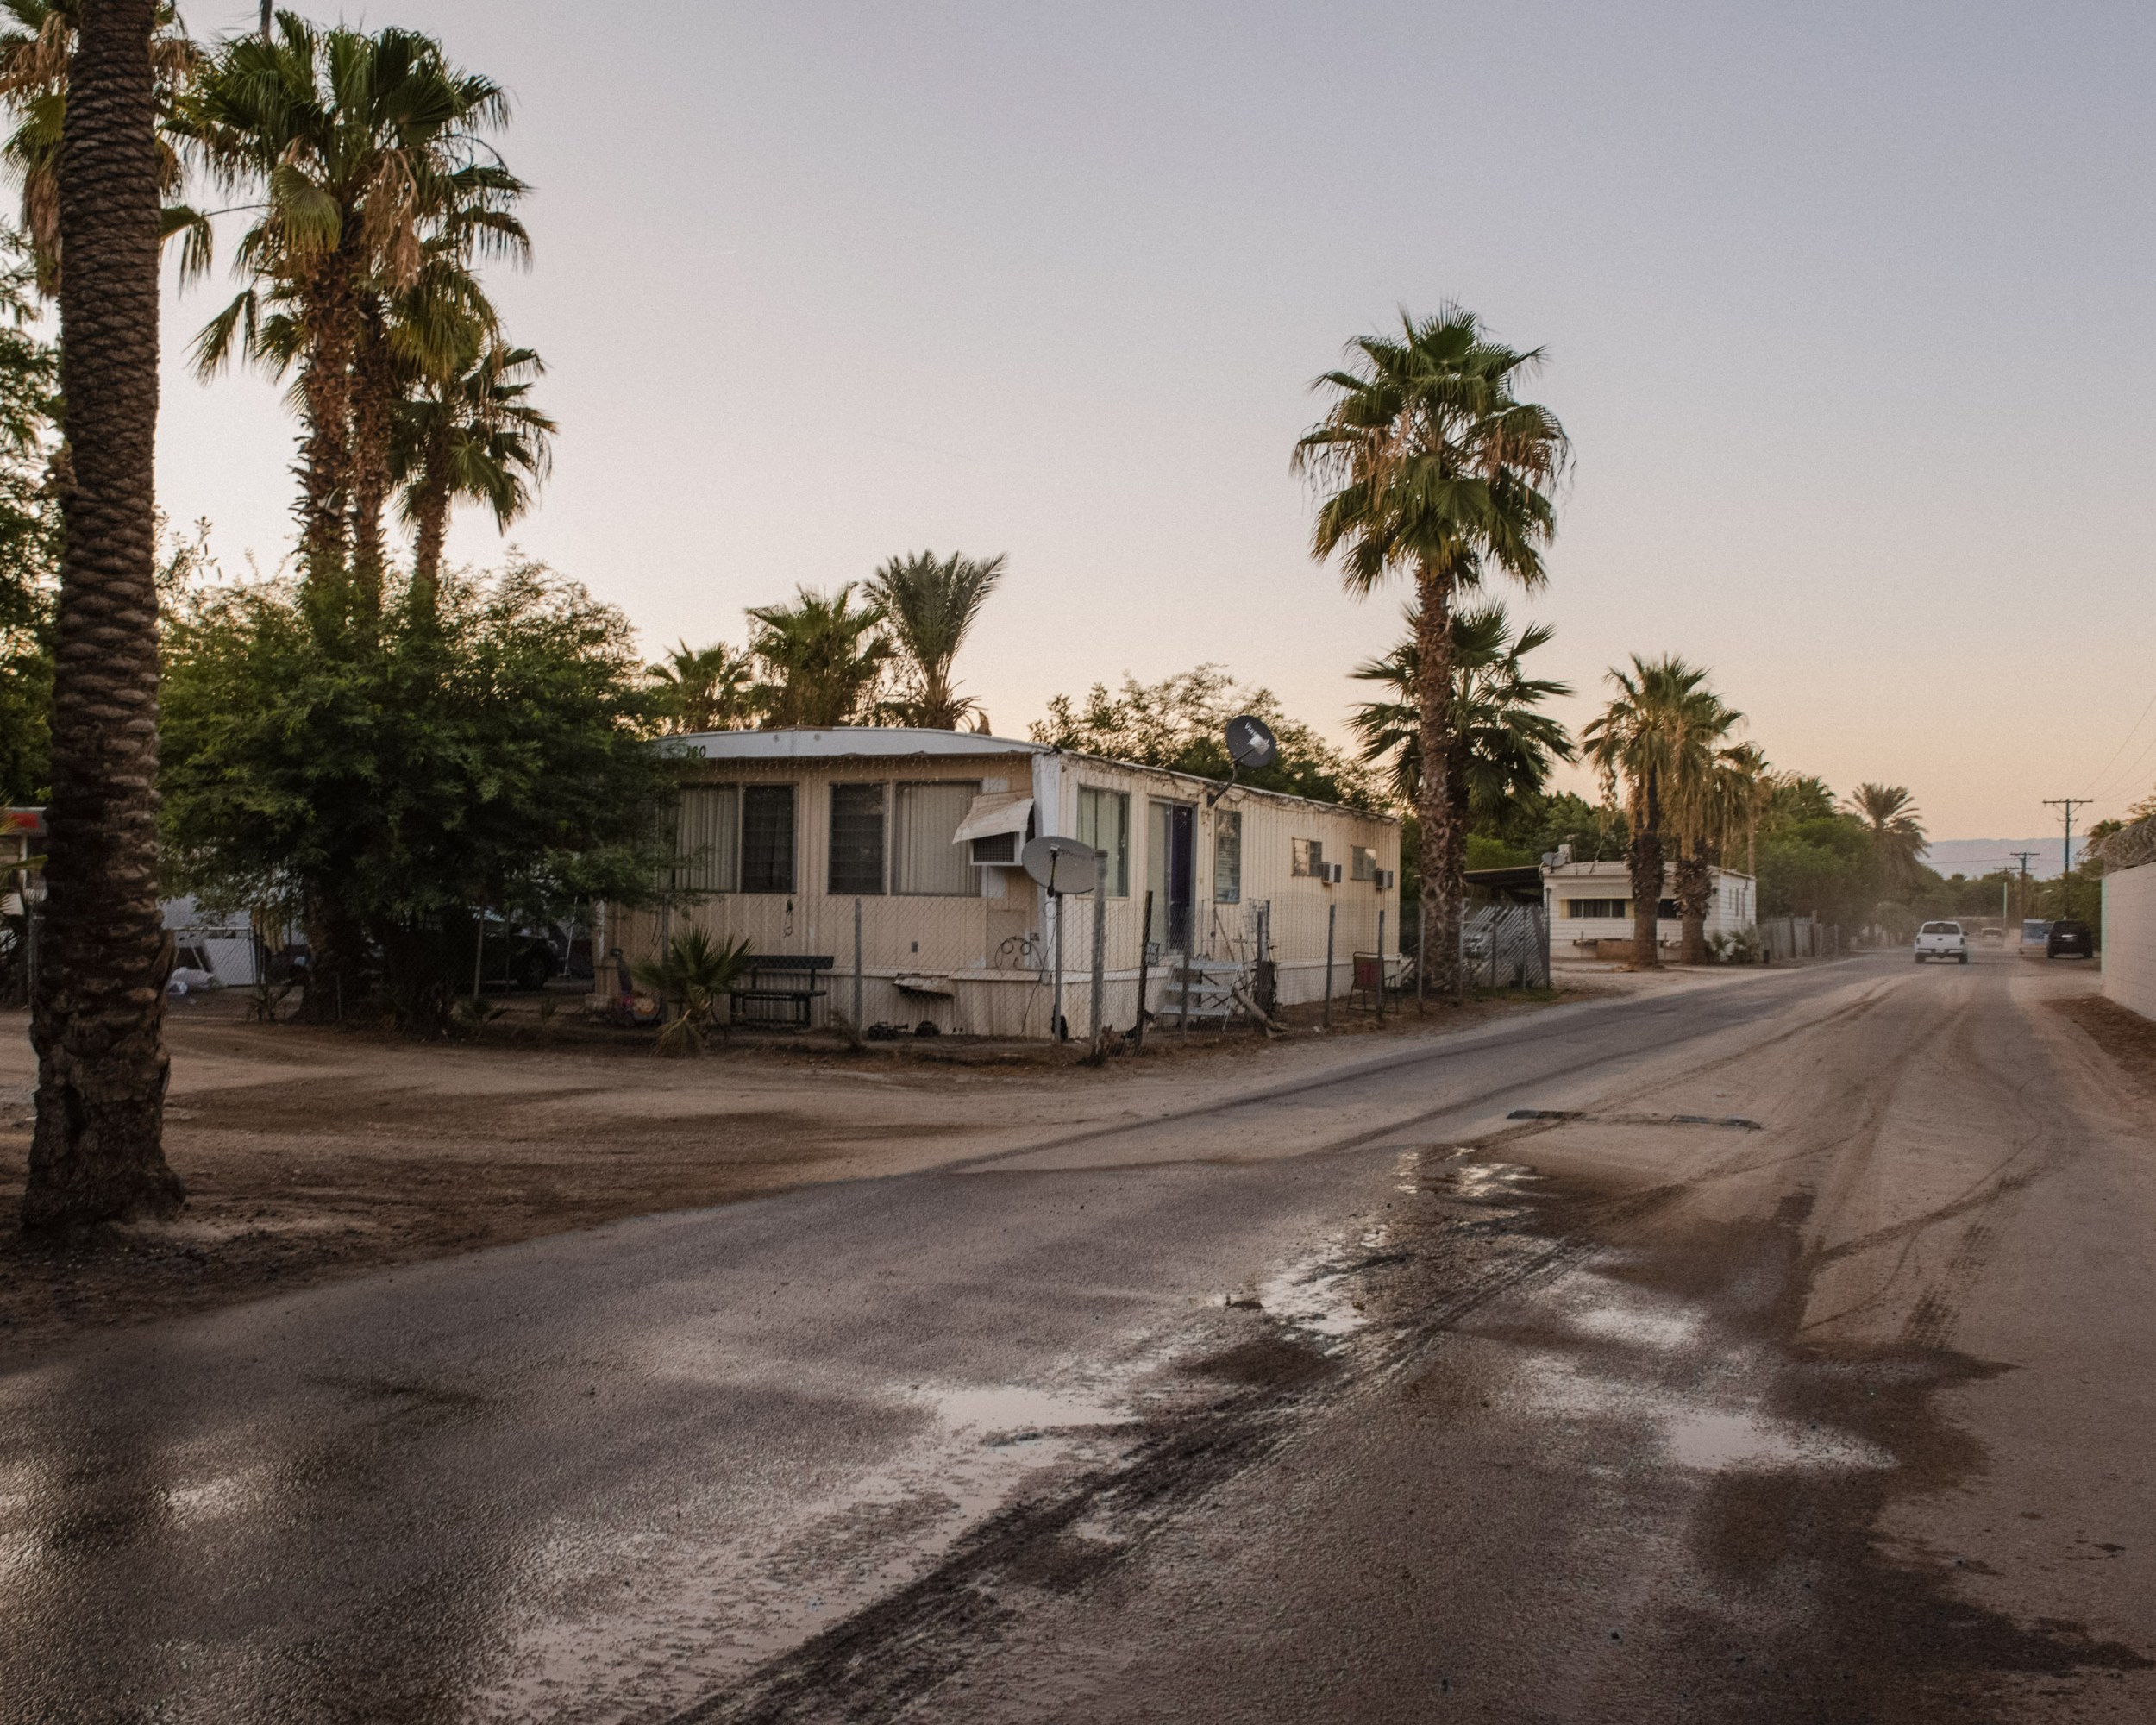 view across an intersection of a mobile home framed by palm trees